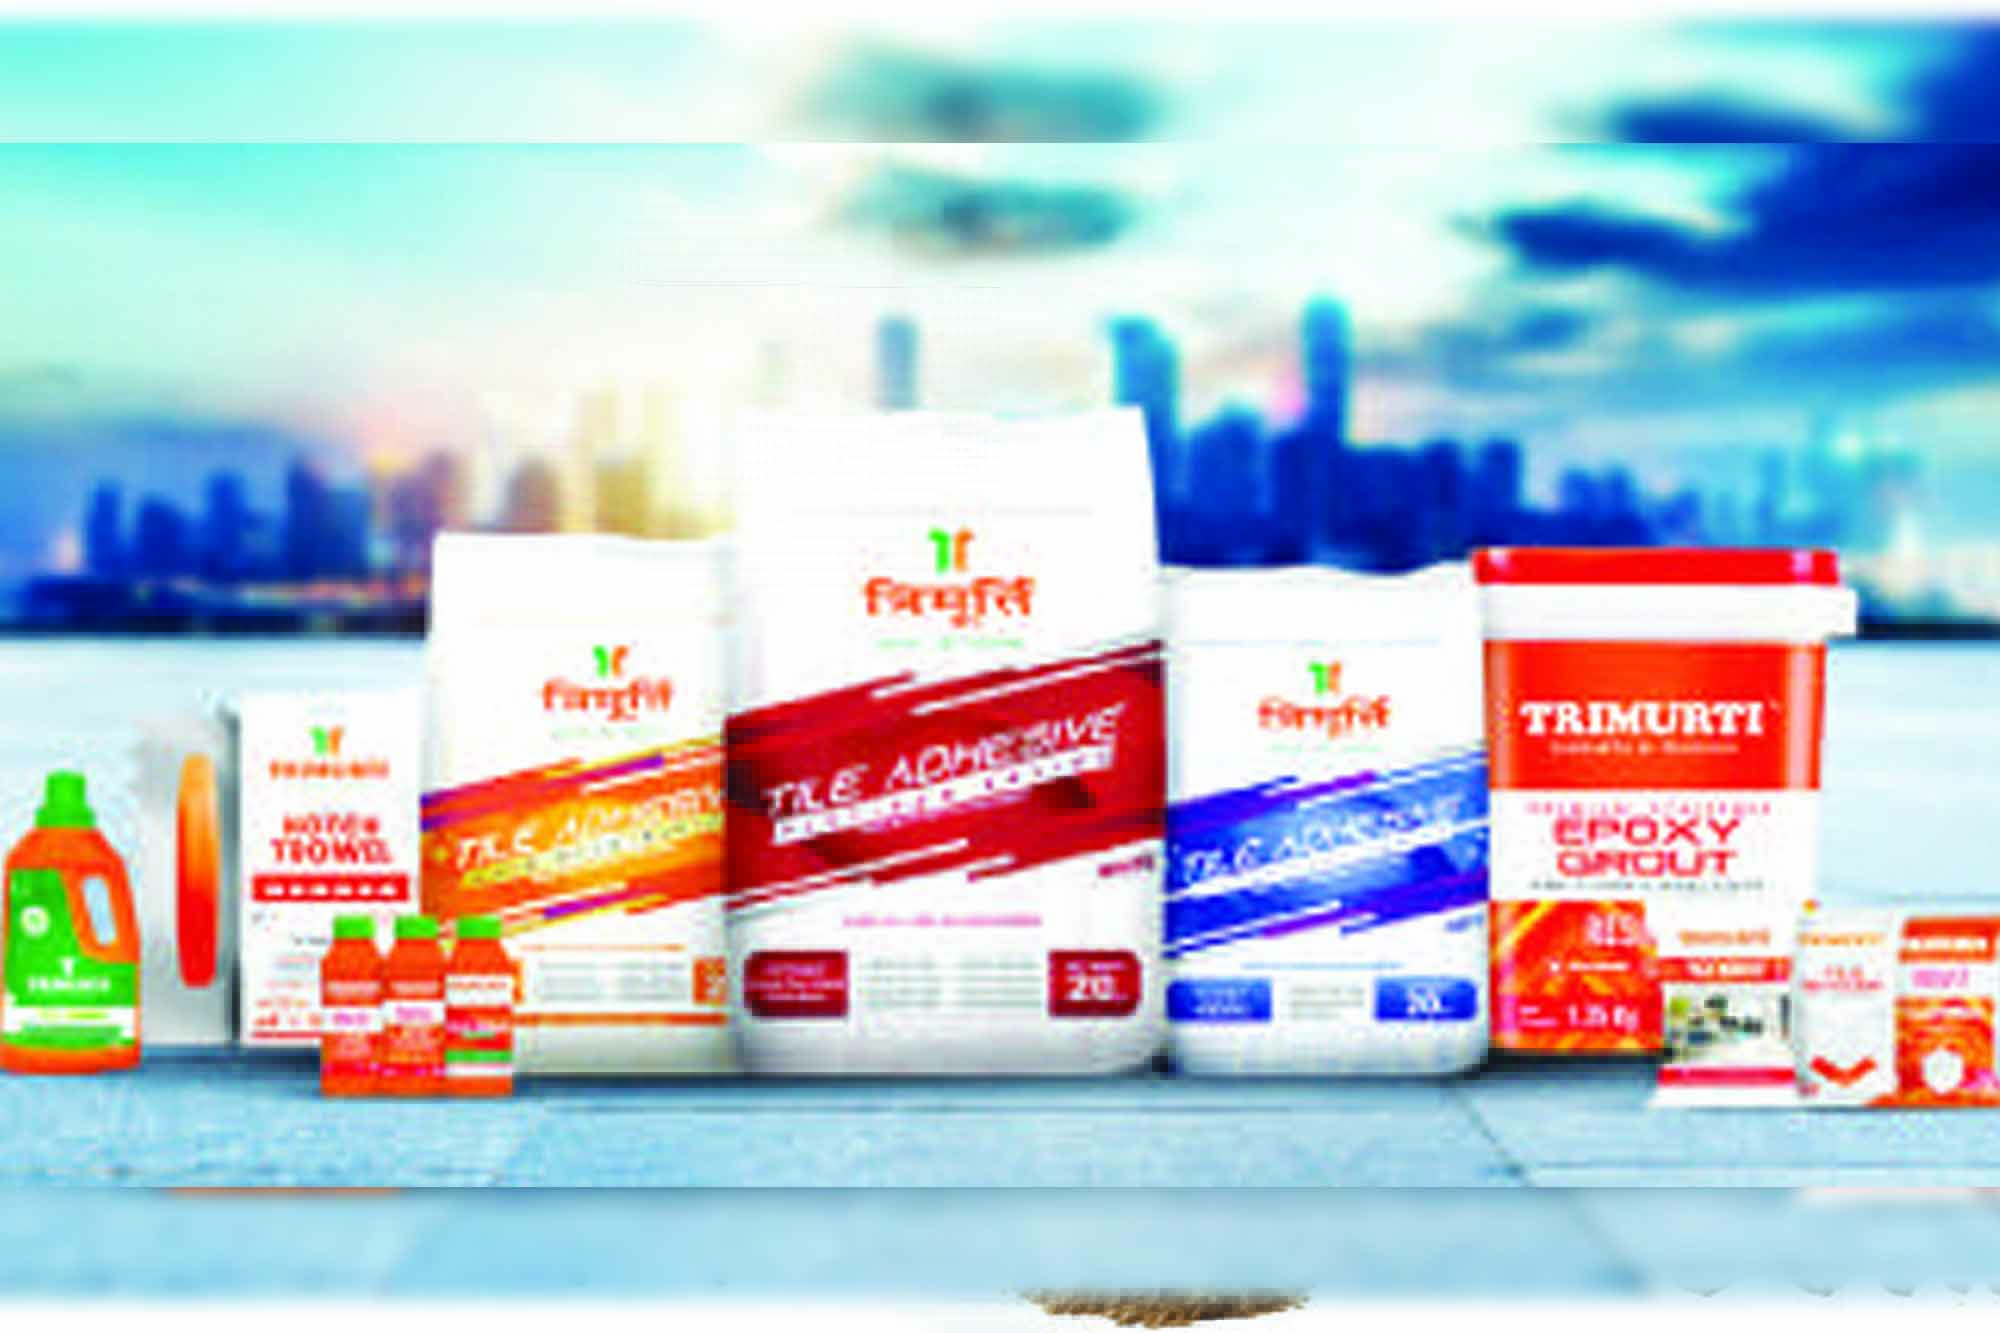 Trimurti, a leading best-recognised manufacturer and exporter in India, has a range of wall finishing products like gypsum plaster, wall putty, one coat gypsum plaster, gypsum bond, AAC block joining mortar, decorative white cement, ceiling products, tile adhesive and offering a wide range of tile care products - all of which meet international standards for quality and effectiveness. This is ensured by Trimurti’s well-equipped quality control and testing unit, which has earned the company ISO 9001:2015 and 14001:2015 certification, as well as ISI accreditation in Wall Putty and Gypsum Plaster - and that’s the reason why customers continue over the years to trust the company’s products. Although the Trimurti brand has a presence across the country, it is more dominant in the markets of Punjab, Uttarakhand, Haryana, Delhi, UP, Bihar, Assam, Rajasthan, Madhya Pradesh, Chhattisgarh and Maharashtra. Manik Gupta, Director of Trimurti Wall Care Products Pvt. Ltd. says, “Today, our company is established as a leading brand in the Indian market for wall care products. We have a vast range of international quality products, and we are using the latest techniques and technology to develop them with utmost precision under strict quality control. We conduct rigorous testing at every stage of production to ensure that we provide the highest quality products to our customers, so today we have a loyal customer base who considers Trimurti to be one of the most trusted brands in the wall care products industry.” “Our manufacturing units are located in the Bikaner and Alwar districts of Rajasthan, which can produce any quantity within the required timelines. In the last two decades, we’ve made our mark as one of India’s leading companies in Wall Care products, and our aim is to be listed among the world’s leaders in this product category. All our products are developed per international quality standards and are sustainable,” said Avers Rahul Gupta, Director of Trimurti Wall Care Products Pvt. Ltd. The company is recognised by some of the top organisations and awarded with awards like the Best Emerging Company Award” in 2020 by Business Mint”; Dainik Jagran’s “Local for Vocal Award in 2021”; Global Excellence Award for ‘Best Wall Putty & POP Manufacturer in North India’ in 2022 by Anupam Kher”; and Global Excellence Award for Best Wall Putty in North India 2023 by Madhuri Dixit. Trimurti products categories Wall putty: Wall putty is a white cement-based powder made of polymer and other minerals that make the wall look smoother. It is primarily used to fill in cracks and holes in walls and prepare an even wall surface before applying paint. It is developed as a finishing coat that covers the major pinholes or undulations and, hence, uniformly covers the surface. It applies to all plaster and concrete walls, ceilings, and renovation of older structures or buildings. Gypsum plaster: Trimurti gypsum plaster is generally made up of heated gypsum at a high temperature. It is a white powdery chemical compound called hydrated calcium sulphate. Trimurti Gypsum Plaster is most suitable for applying internal plastering systems as the punning of walls, ceilings, and all decorative works like cornices, mouldings, and arches. The best part of Trimurti is that it hardens slowly with extra coverage and impurities-free features, which makes it favourable to the construction teams and saves their time. Trimurti is one of the largest and best-quality Gypsum Plaster manufacturers in India. Tile adhesive: It is a formulated polymer-modified Adhesive that can be used to fix different types of tiles, including mosaic tiles, ceramic tiles, small and large dimensions, Stones, etc. It can be utilised for fixing a wide range of tiles and stones over different substrates. These tile-fixing adhesives are prepared to blend and self-restore with astounding adhesion properties. Their superior bonding strength prevents shrinkage, breaks, and slippage of tiles. Tile grout: Tile grout is a filler component, a dense material used to seal the joints or gaps between tiles after they have been installed. Grout can offer several benefits, including a complete look to your floor or wall. Also, it is available in a vast range of colours. It is generally a mixture of water, cement, sand, and polymers Gypsum bond (Quick bond): Gypsum bond is a unique mixture of polymer, selected sand fillers, and additives that make it coarse and improve its bonding properties. It is a replacement for the conventional hacking process. A bonding agent is specially formulated as a plaster bonding agent for pre–treatment of smooth backgrounds such as RCC Column beams, slabs, and precast or shears walls. It also has dual bonding features that provide mechanical and chemical grip and eliminate the risk of debonding gypsum or sand cement plaster. It is a ready-to-apply liquid chemical containing coarse aggregates that give the mechanical key and chemical bonding to plaster, thereby eliminating the risk of debonding. White cement: White Portland cement is combined with white aggregates to produce white concrete for prestige construction projects and decorative work. White concrete usually takes the form of precast cladding panels since using white cement for structural purposes is not economical. Epoxy grout: Epoxy grout is a unique and popular grout for tiling that does not use Portland cement or water in the mixing process. It features a hardener, pigments, epoxy resin, and silica fillers. Epoxy grout is less porous compared to cementitious grout. Many of the concerns you might have with traditional grout. Epoxy grout must meet standards in water cleanability (how long water can be left on grout before it leaves a residue), shrinkage, sag, bond, strength, thermal shock, and chemical resistance.